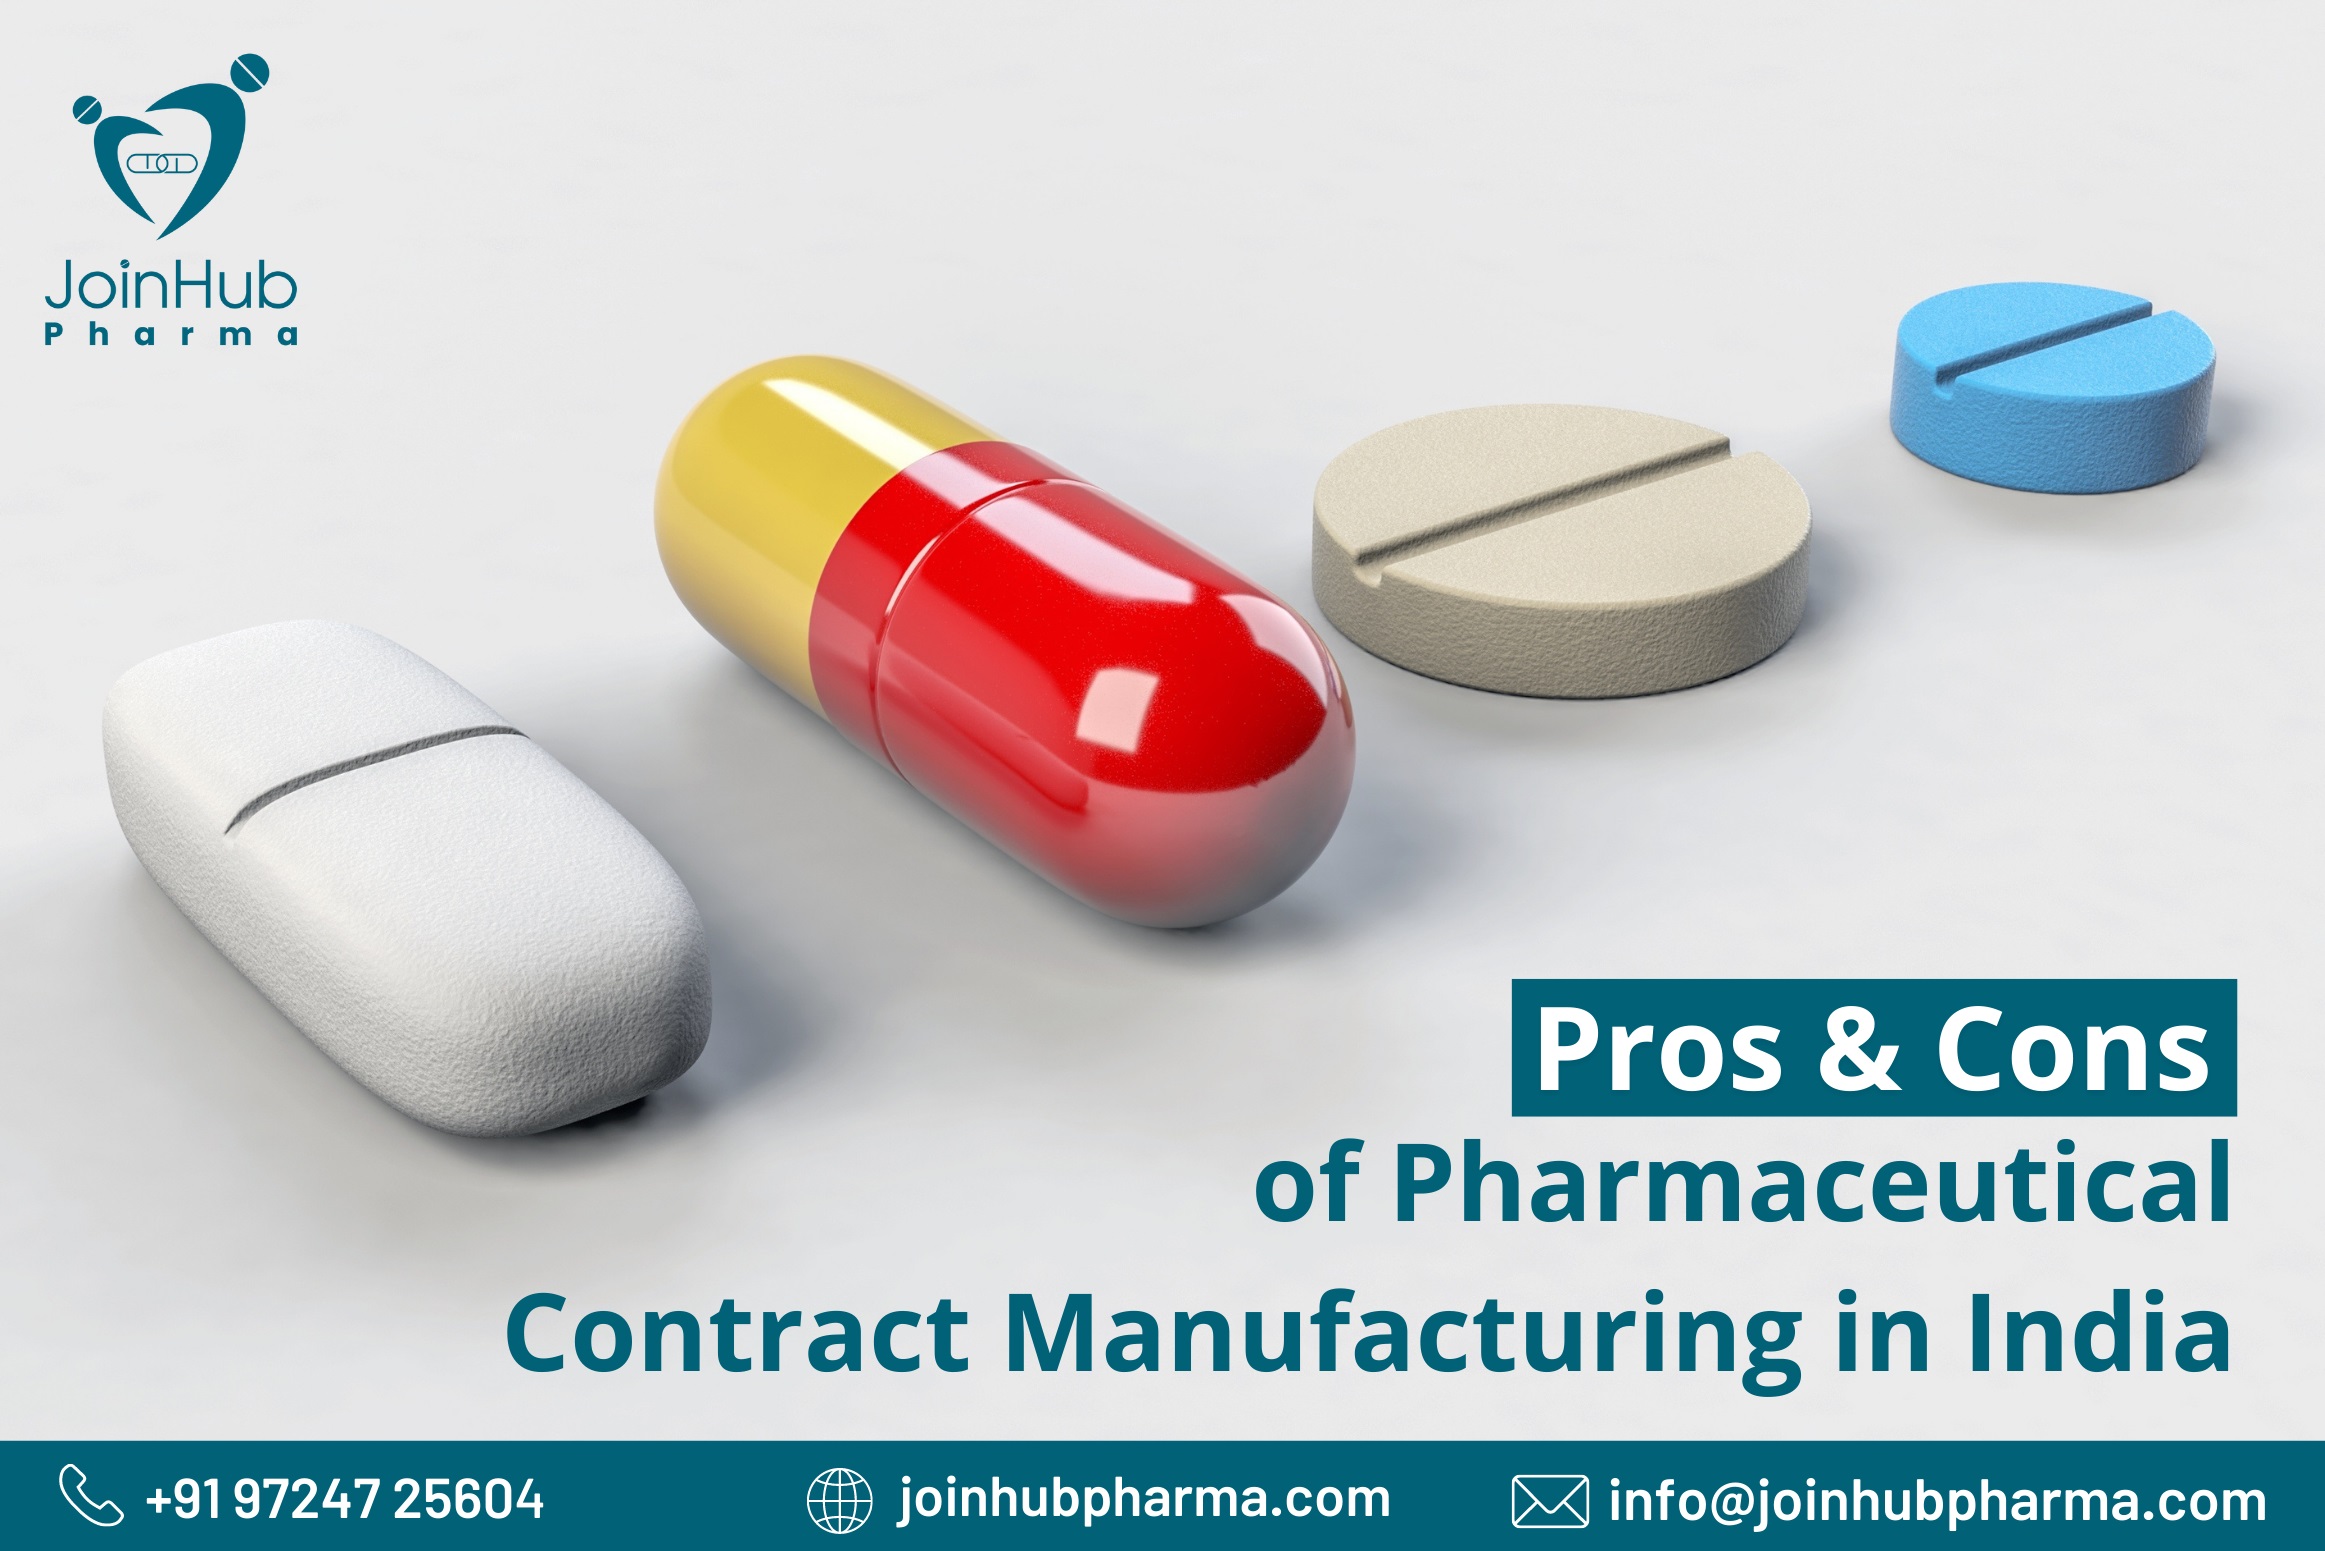 Pros & Cons of Pharma Contract Manufacturing In India